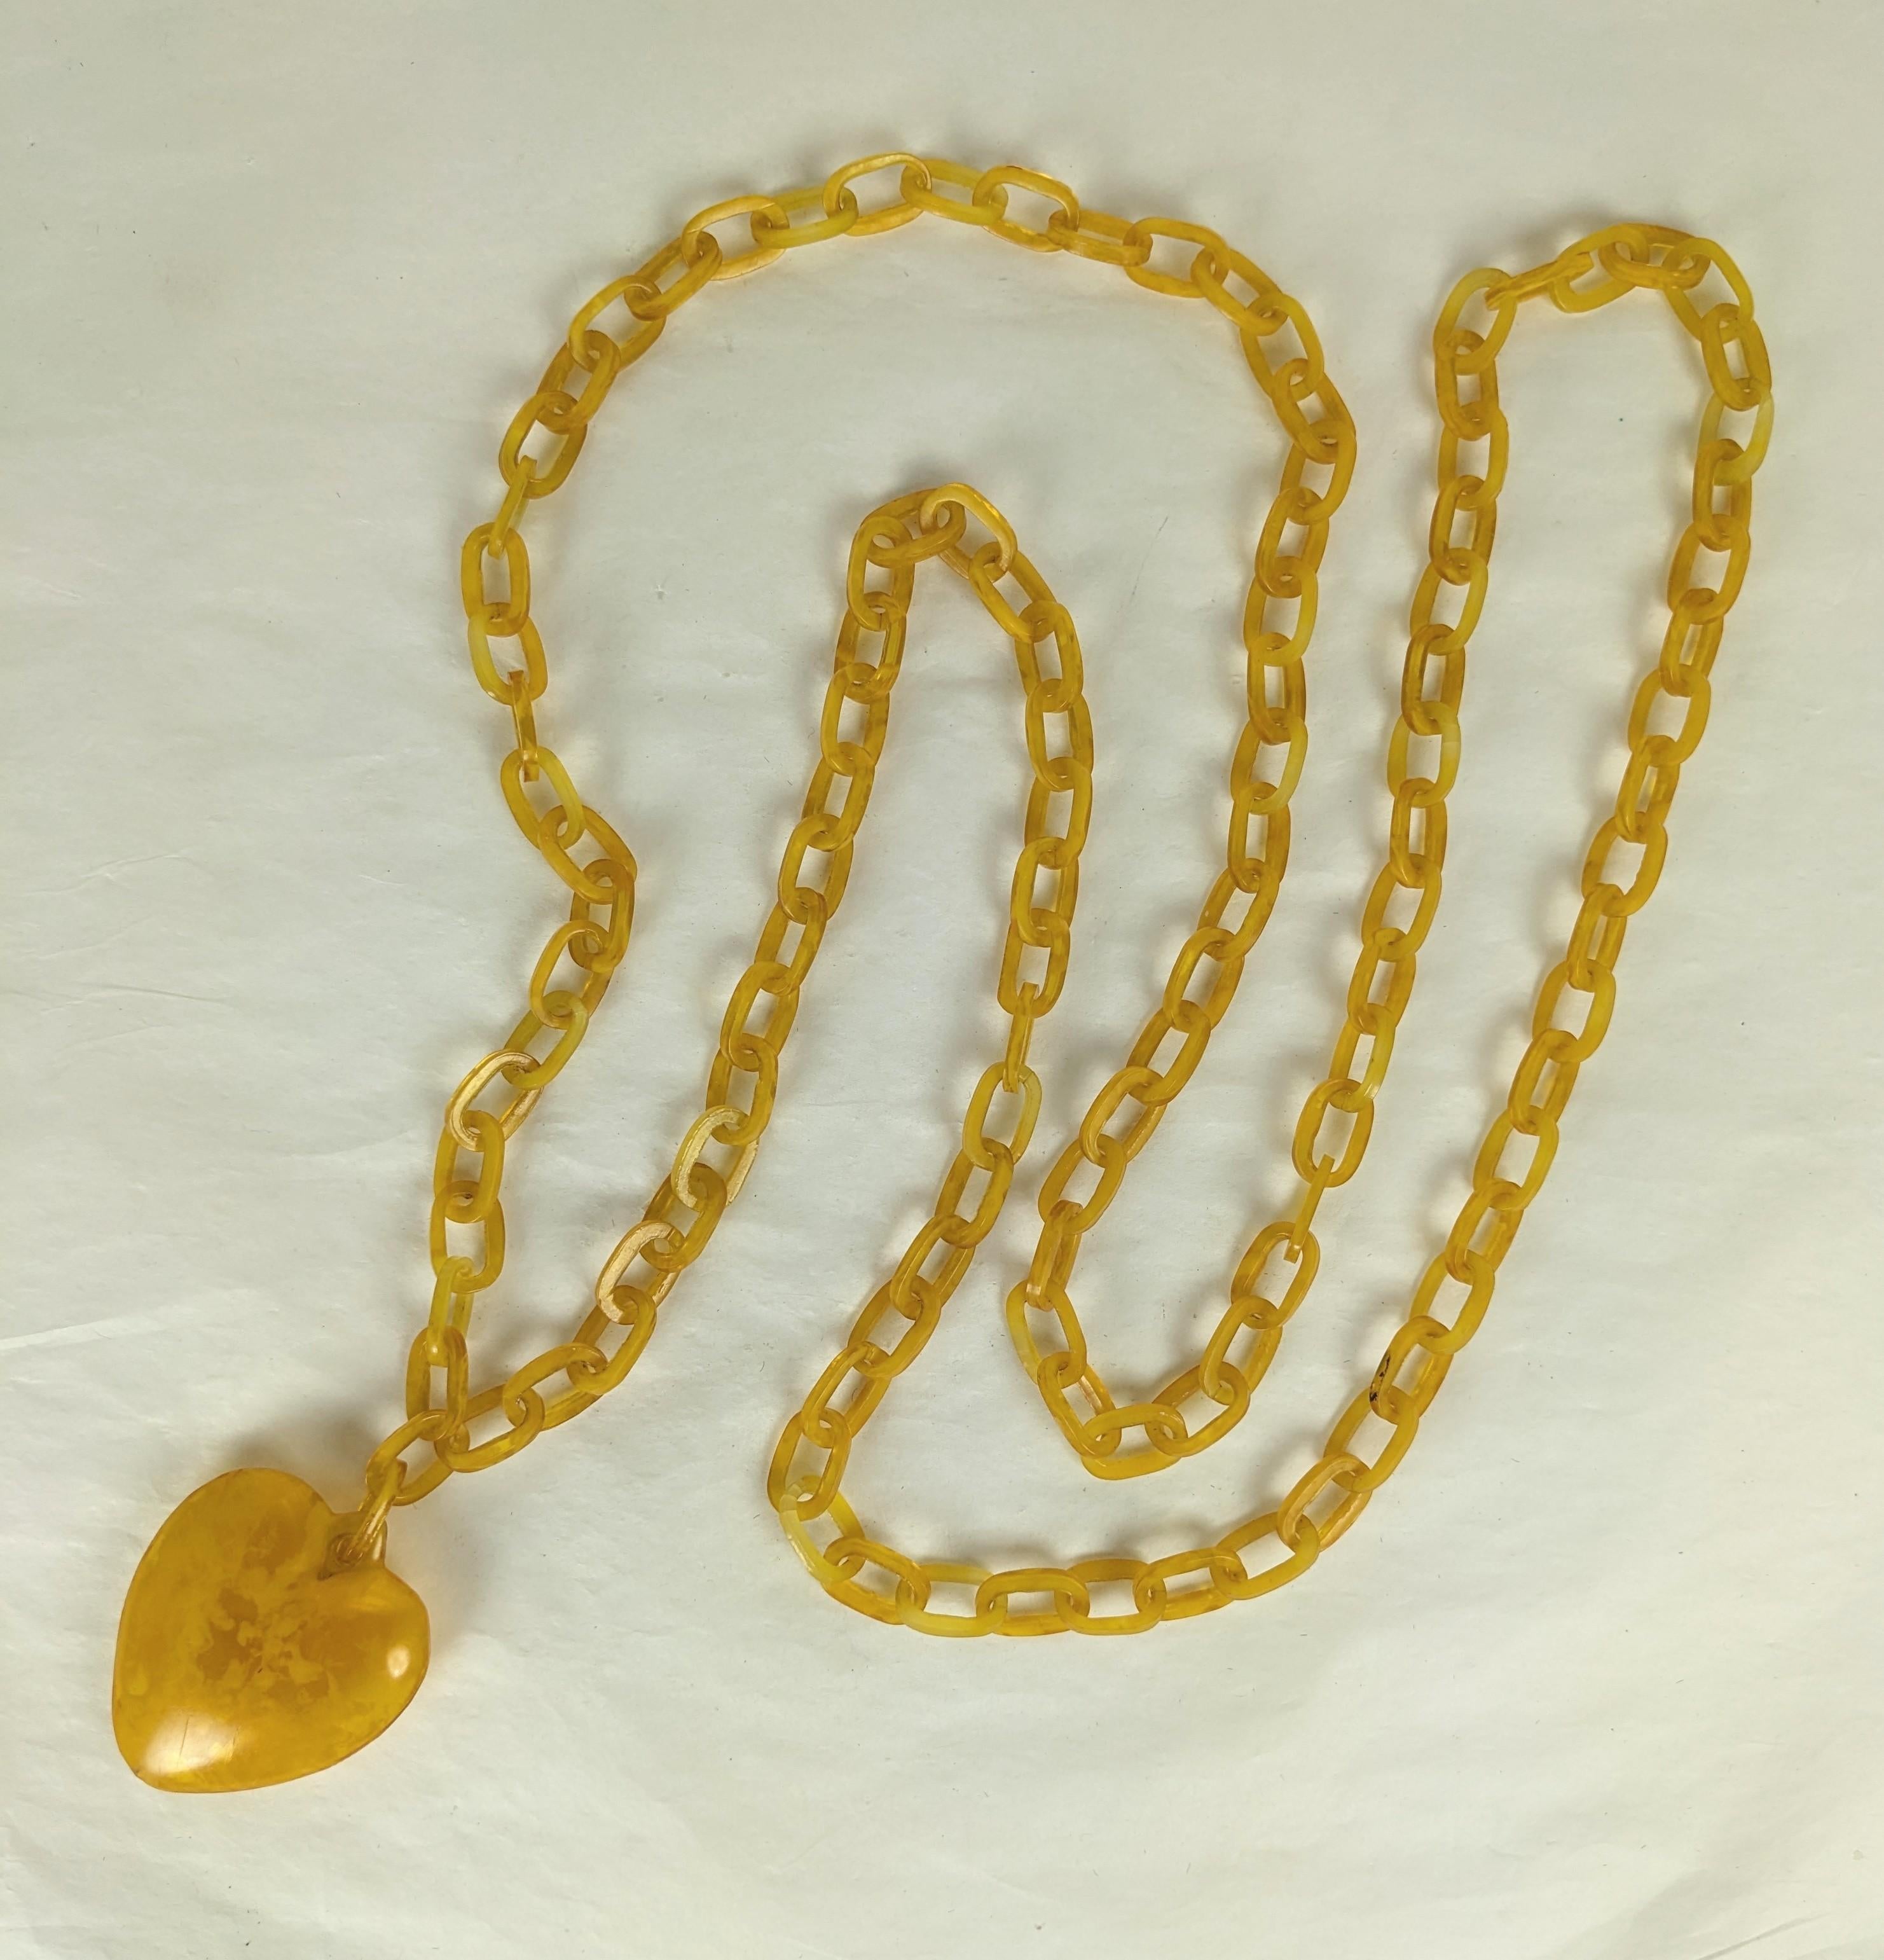 Art Deco Celluloid Heart Chain from the 1920's. Unusual caramel celluloid puffy hollow heart with super long original chain perfect for doubling up around neck. 54